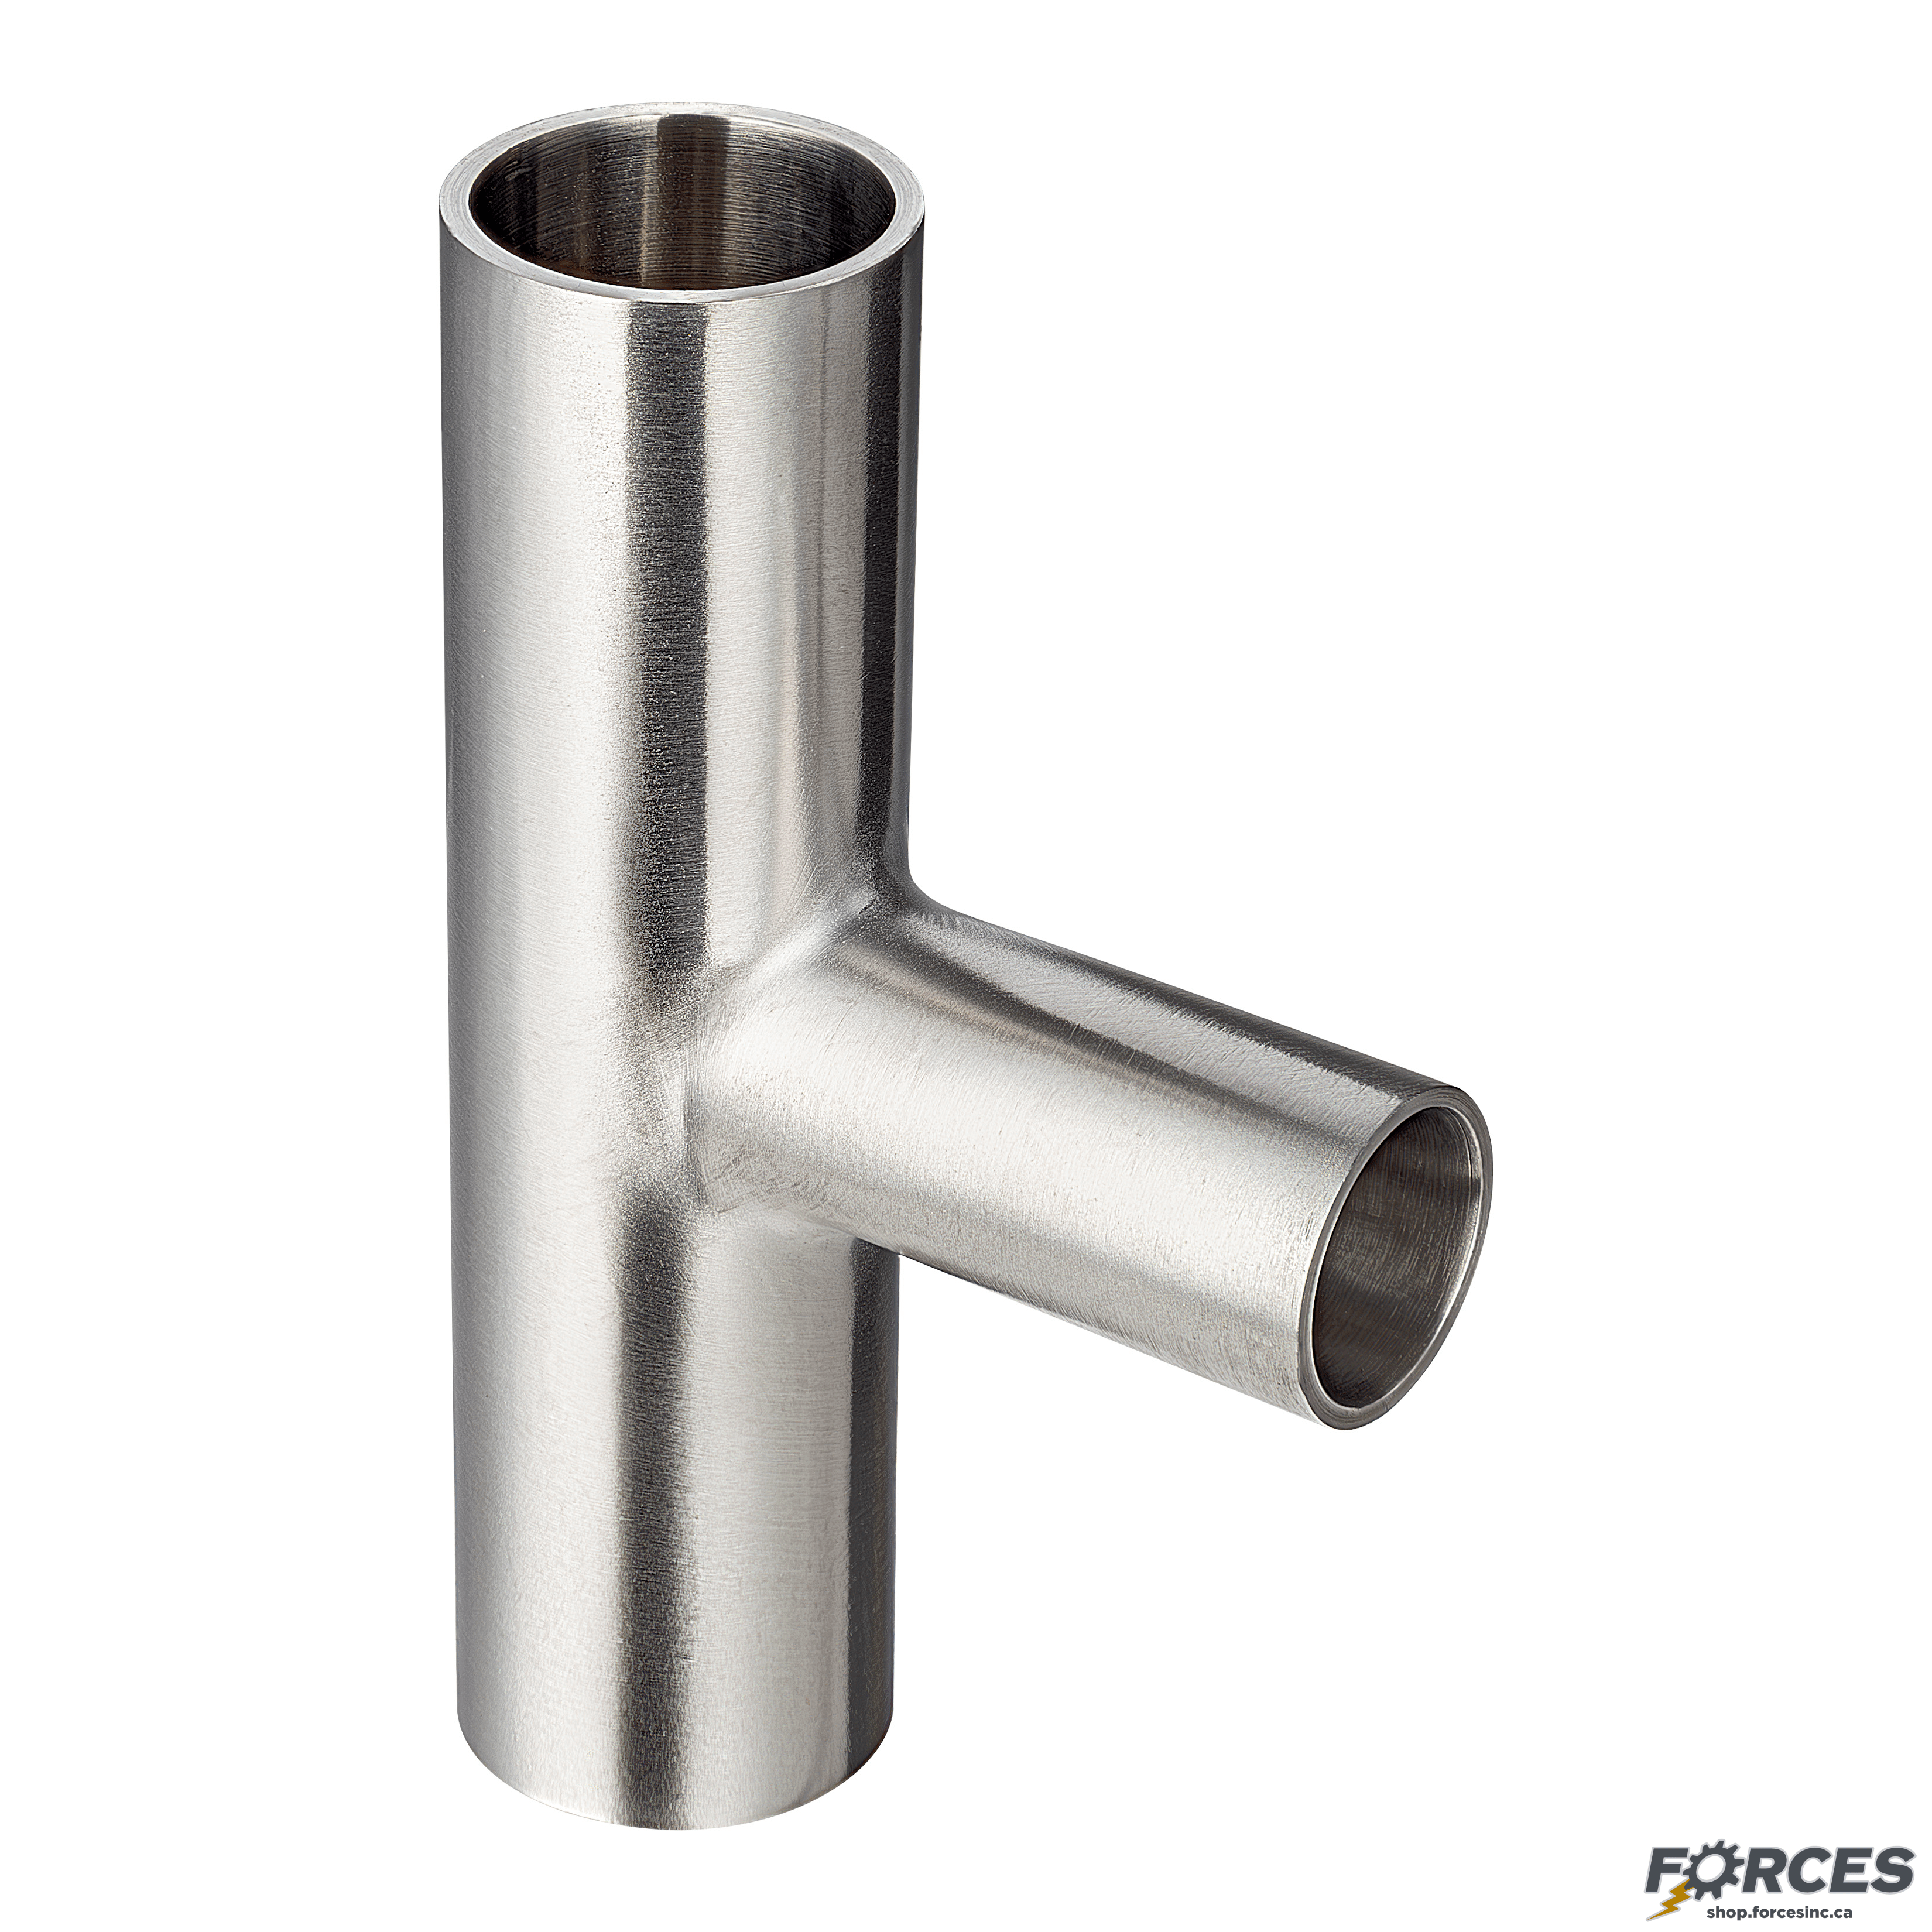 3" x 2" Butt Weld Tee Reducer - Stainless Steel 304 - Forces Inc